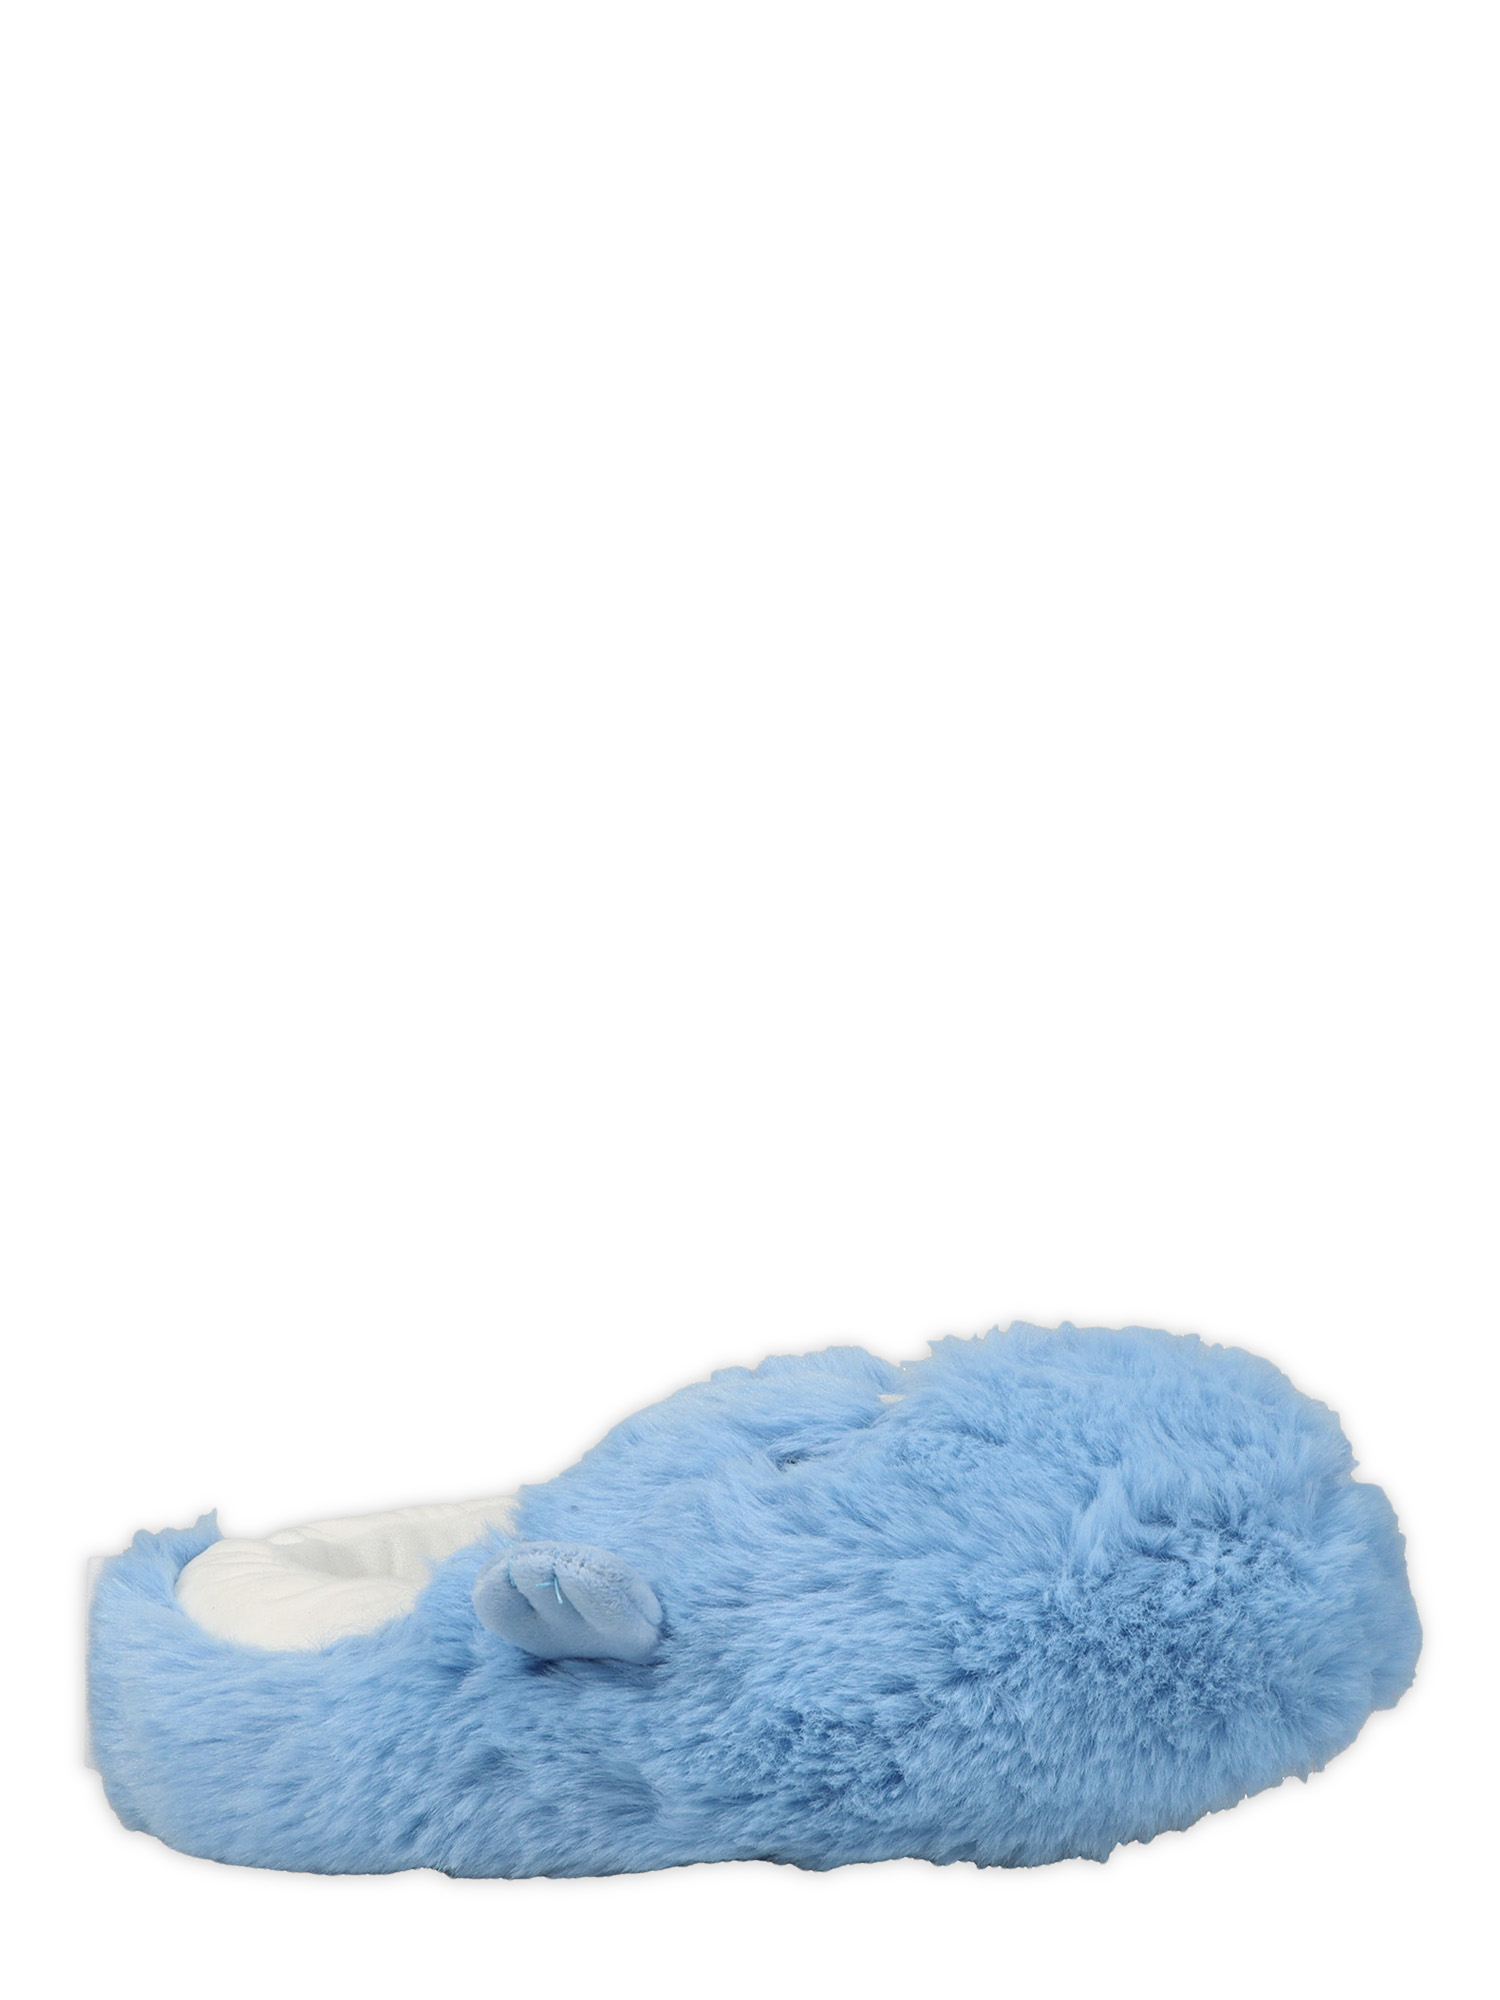 Squishmallows Toddler & Kids Harvey the Walrus Slippers - image 2 of 5